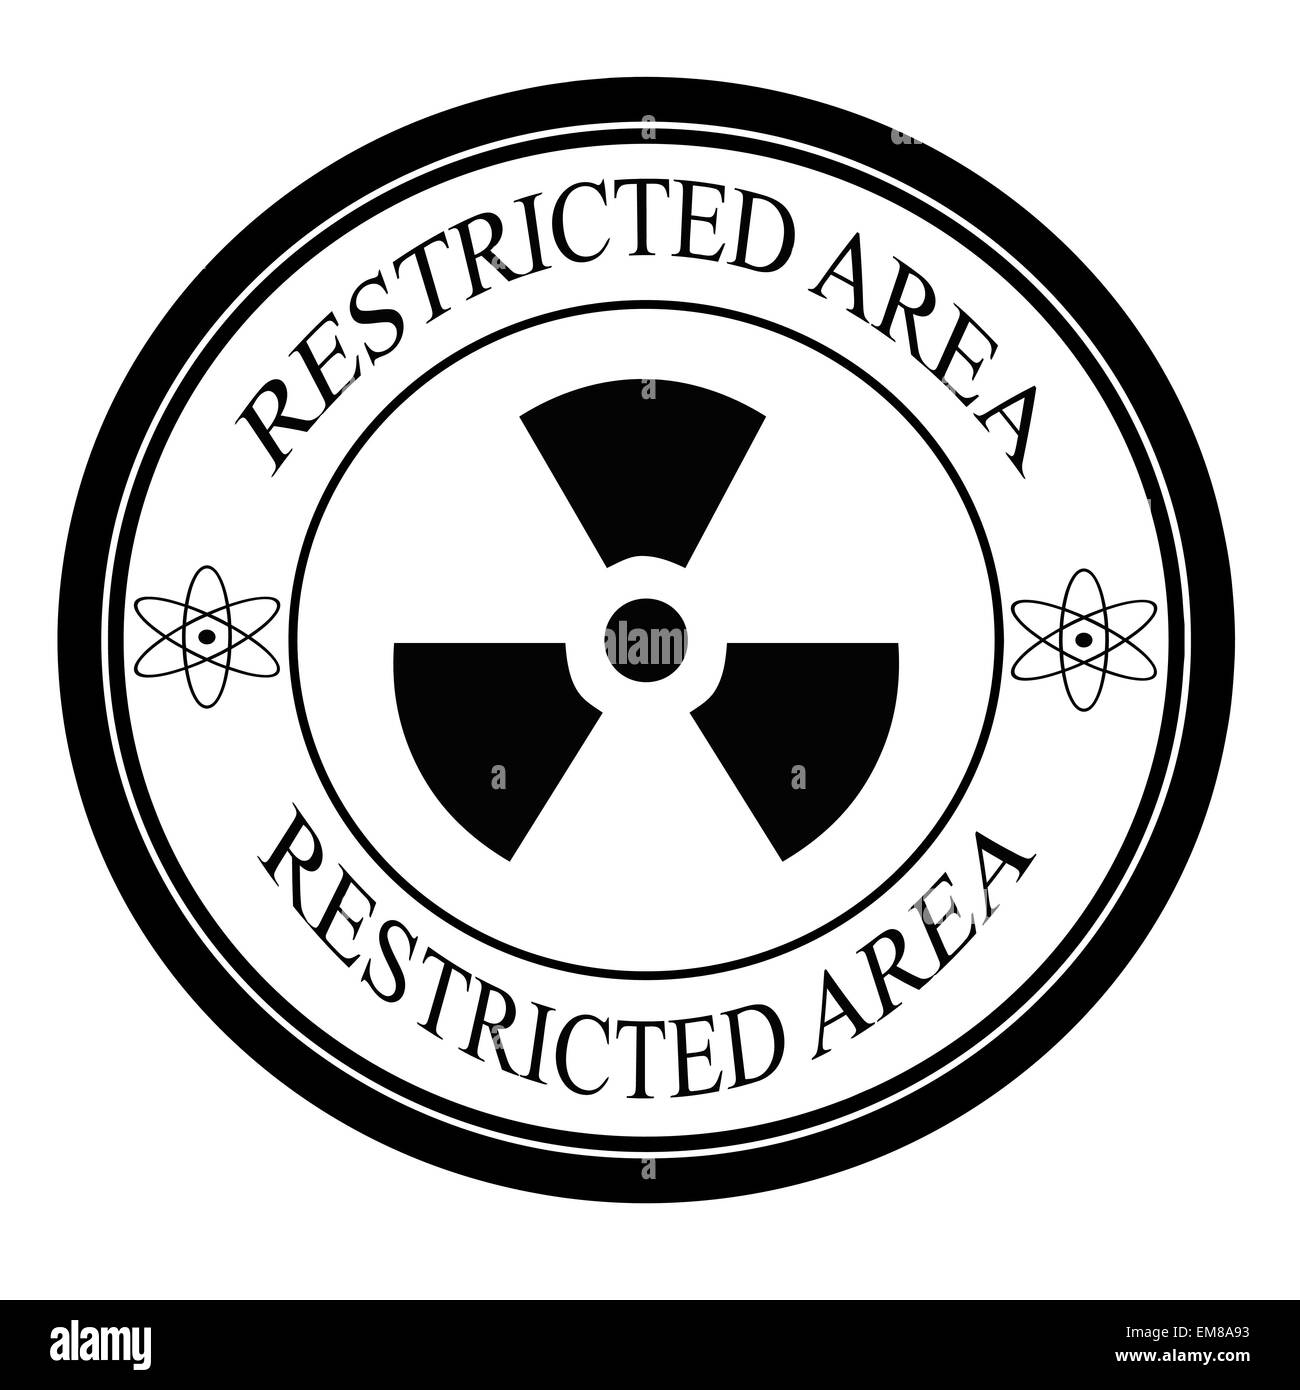 Restricted area Stock Vector